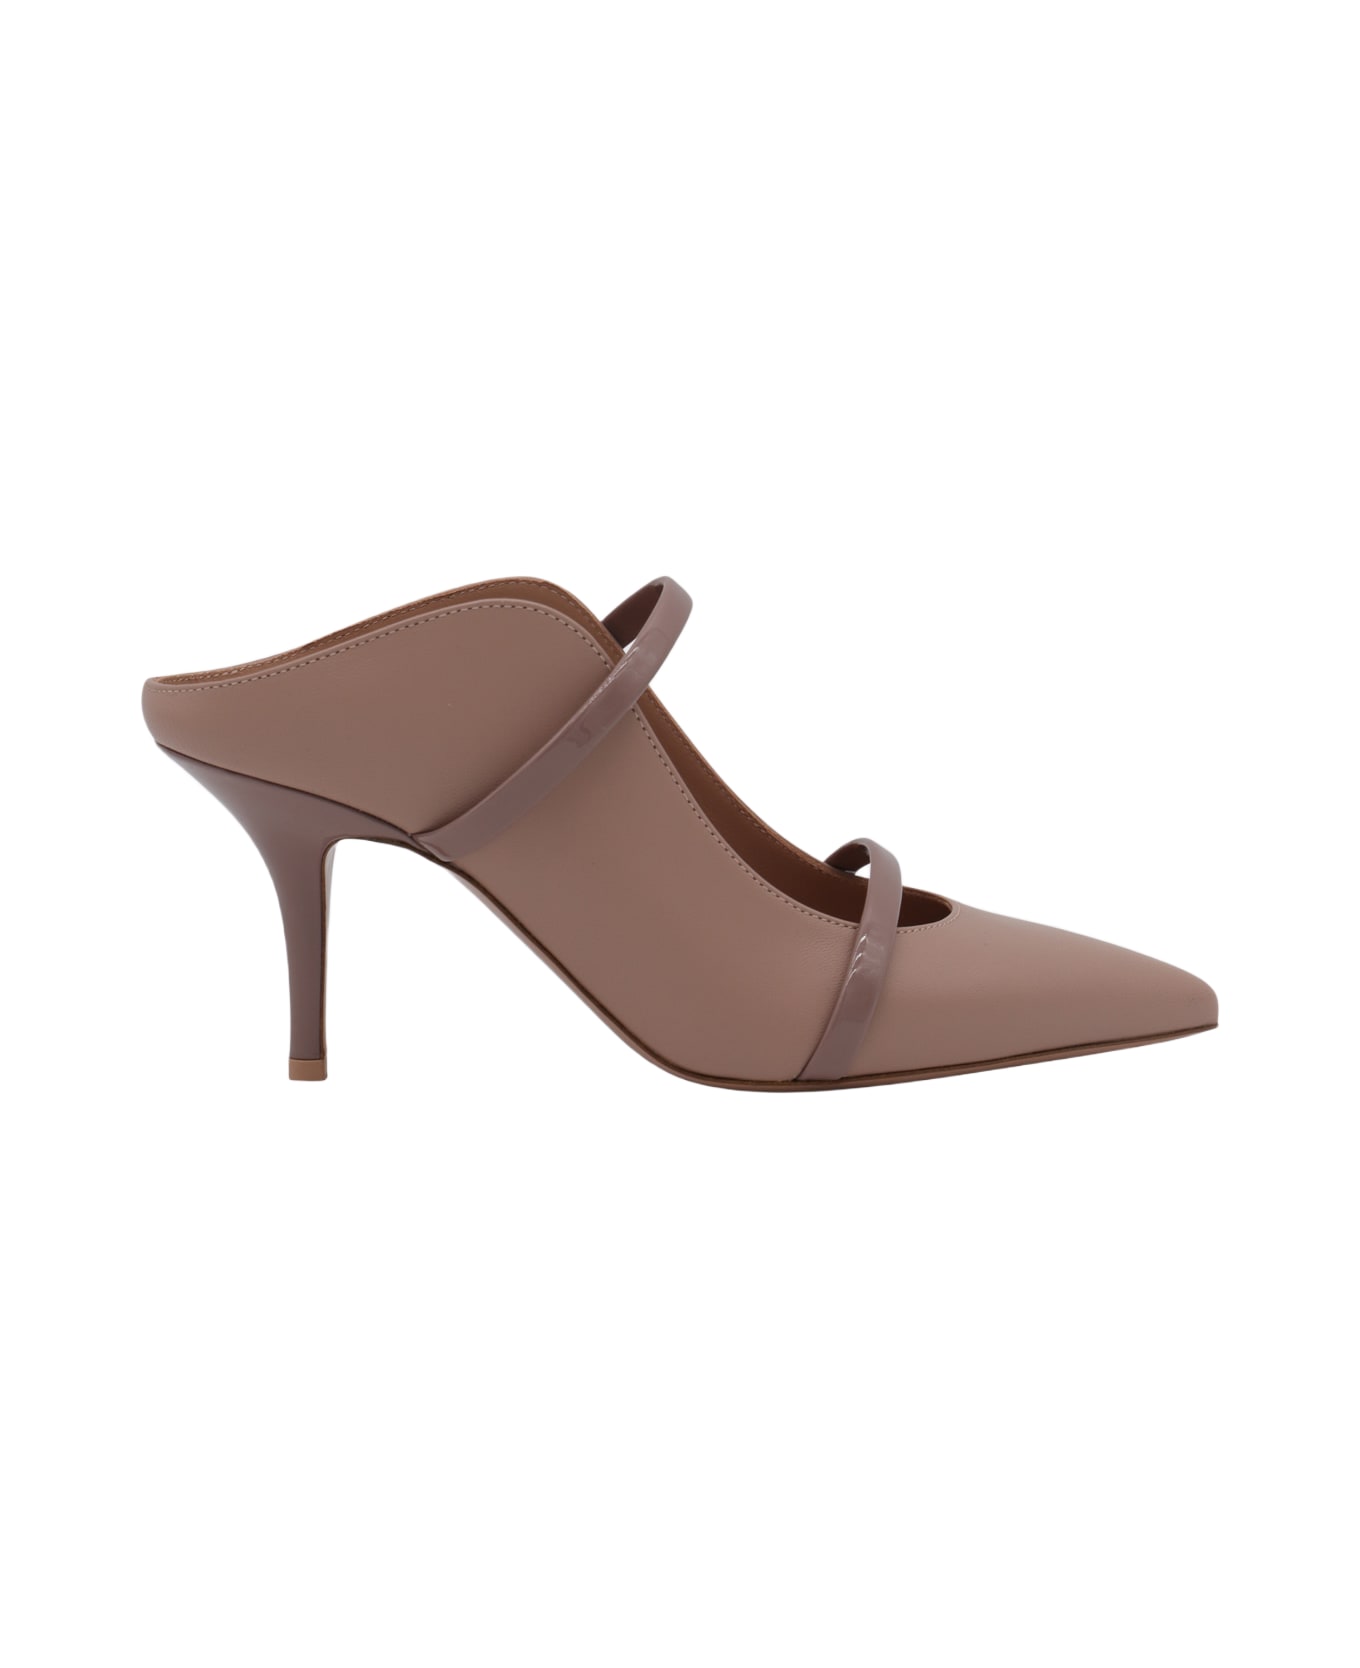 Malone Souliers Dove Pink Leather Maureen Pumps - DOVE/DOVE